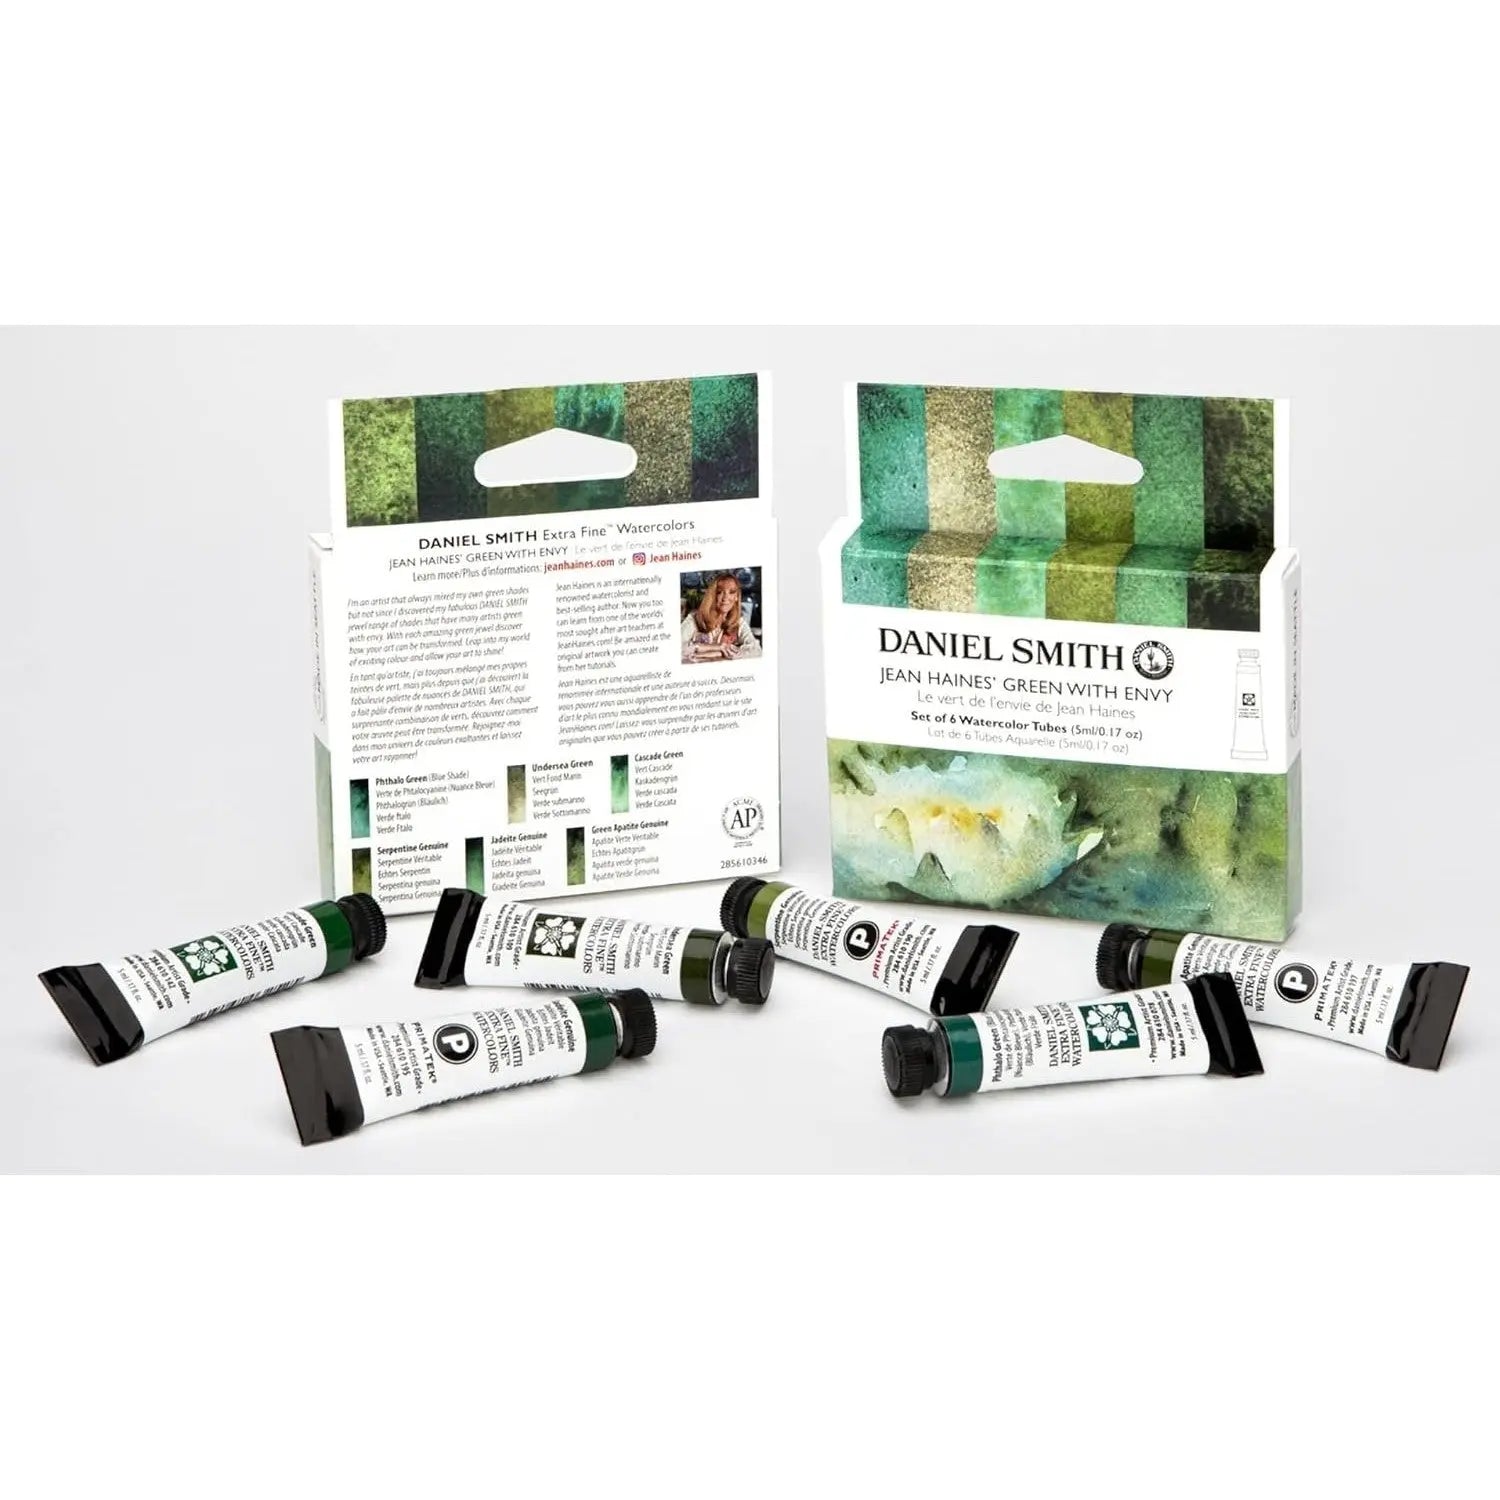 Daniel Smith Jean Haines’ Green with Envy Set of 6 Watercolor Tubes Daniel Smith